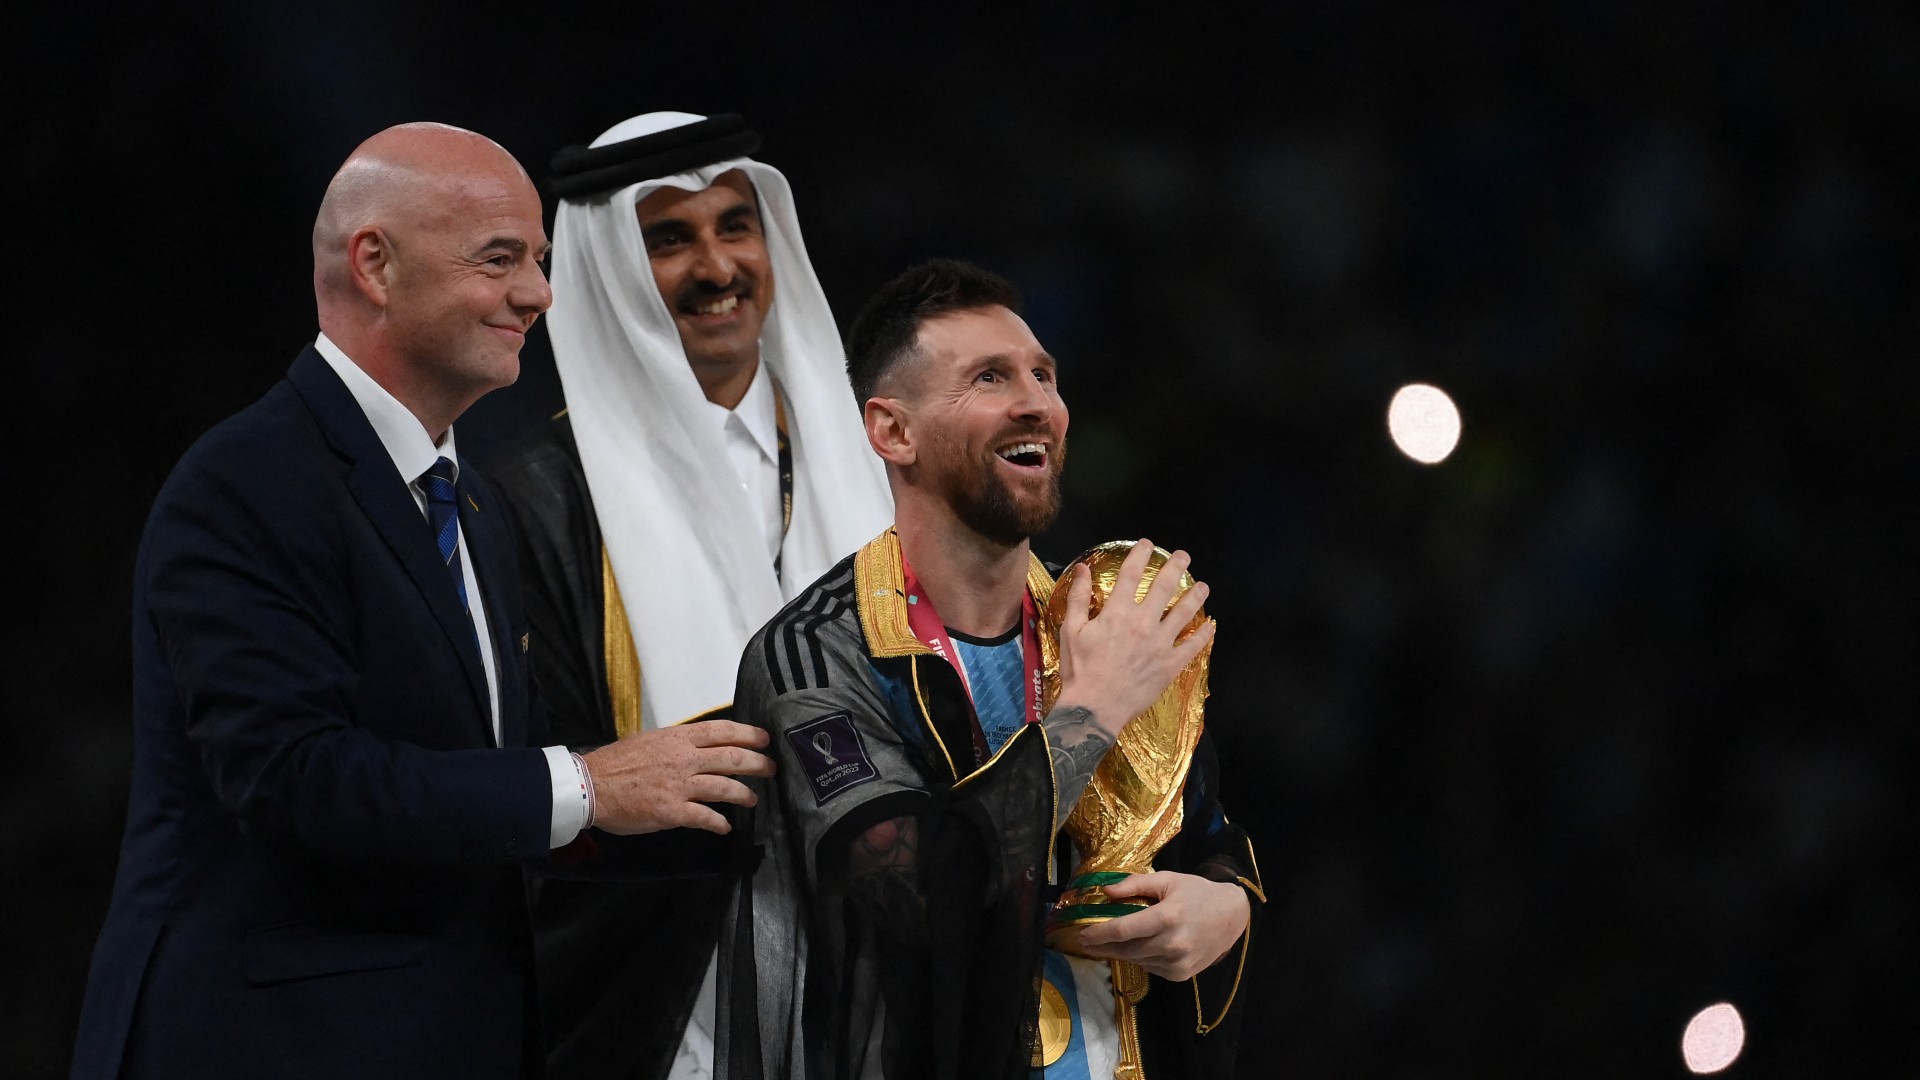 Argentina's forward #10 Lionel Messi holds the World Cup trophy after receiving it from FIFA President Gianni Infantino and Qatar's Emir Sheikh Tamim bin Hamad al-Thani during the Qatar 2022 World Cup trophy ceremony 